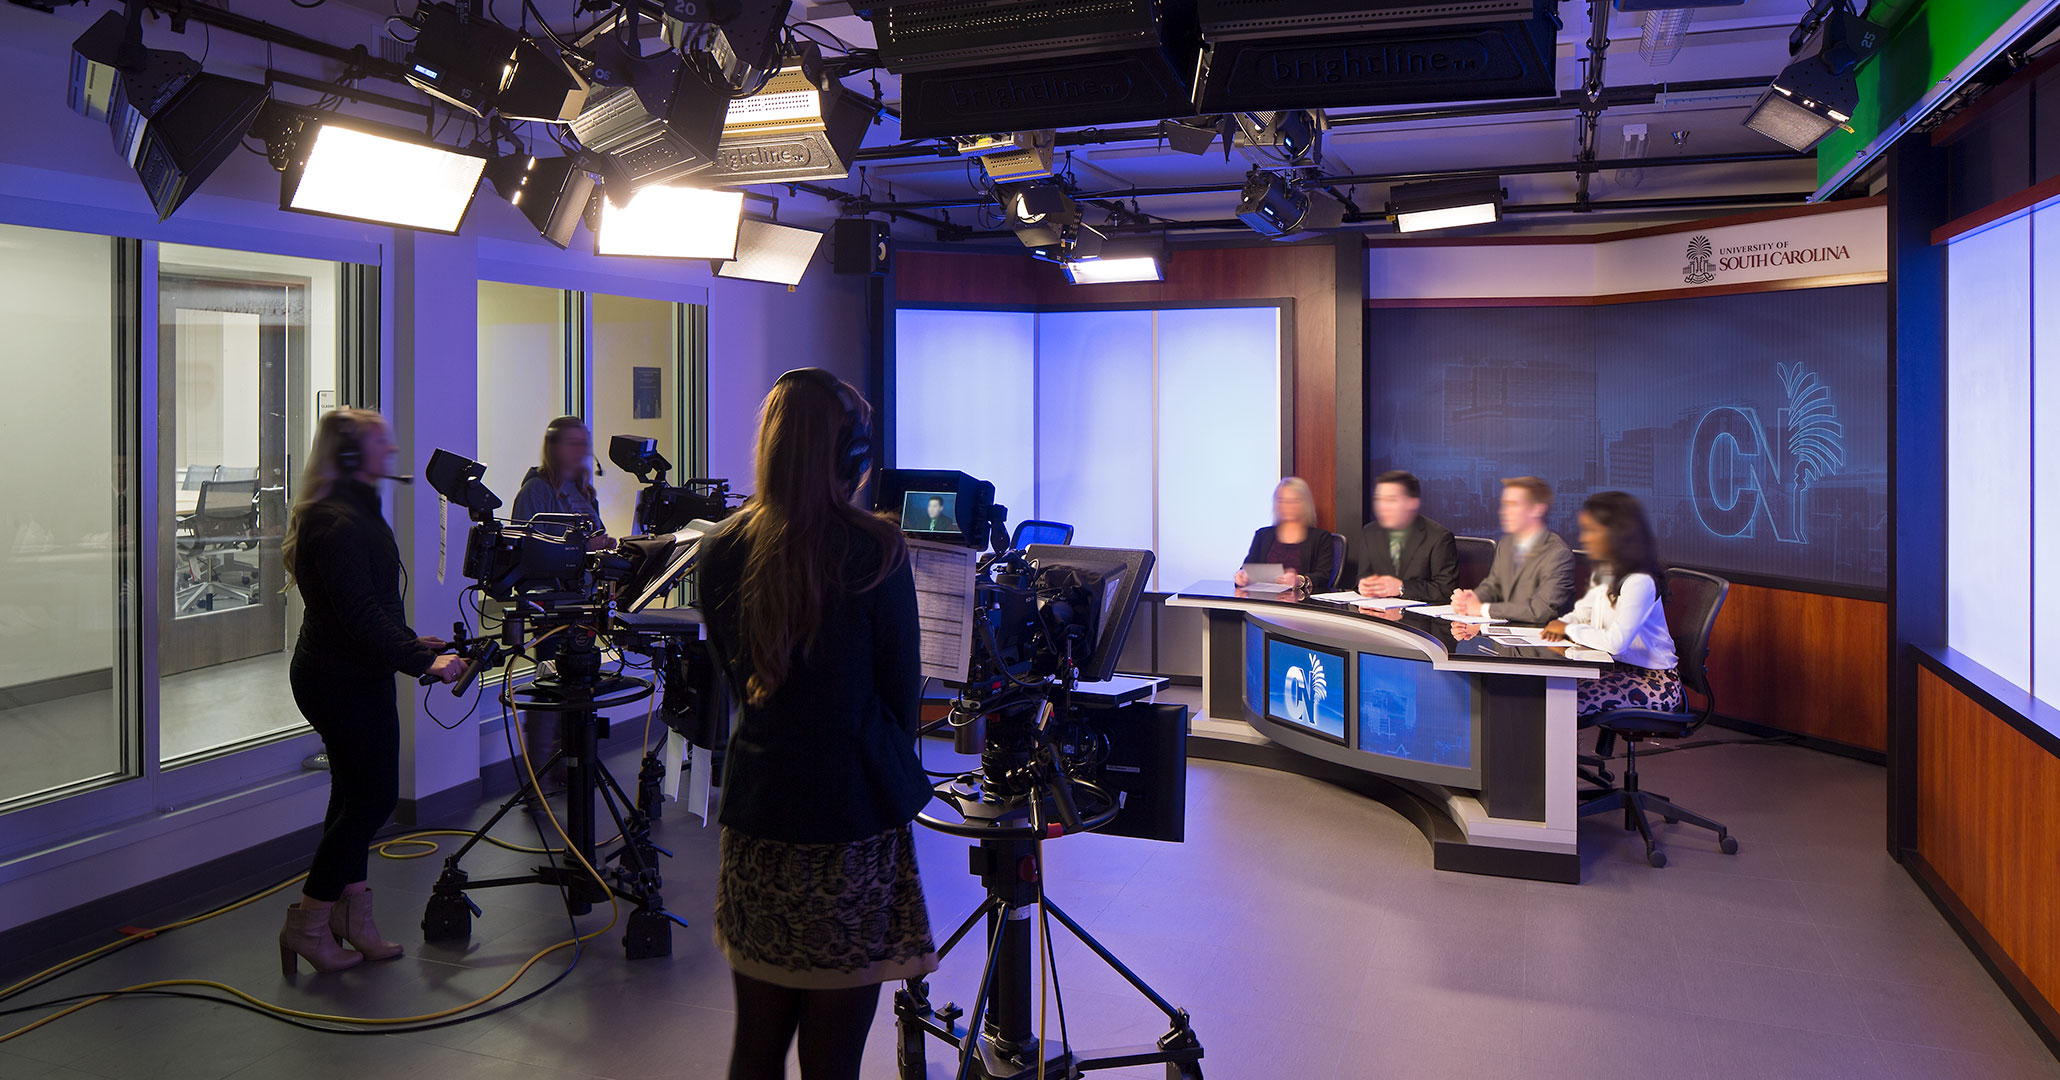 UofSC worked with Boudreaux architects to design a news room at the School of Journalism.